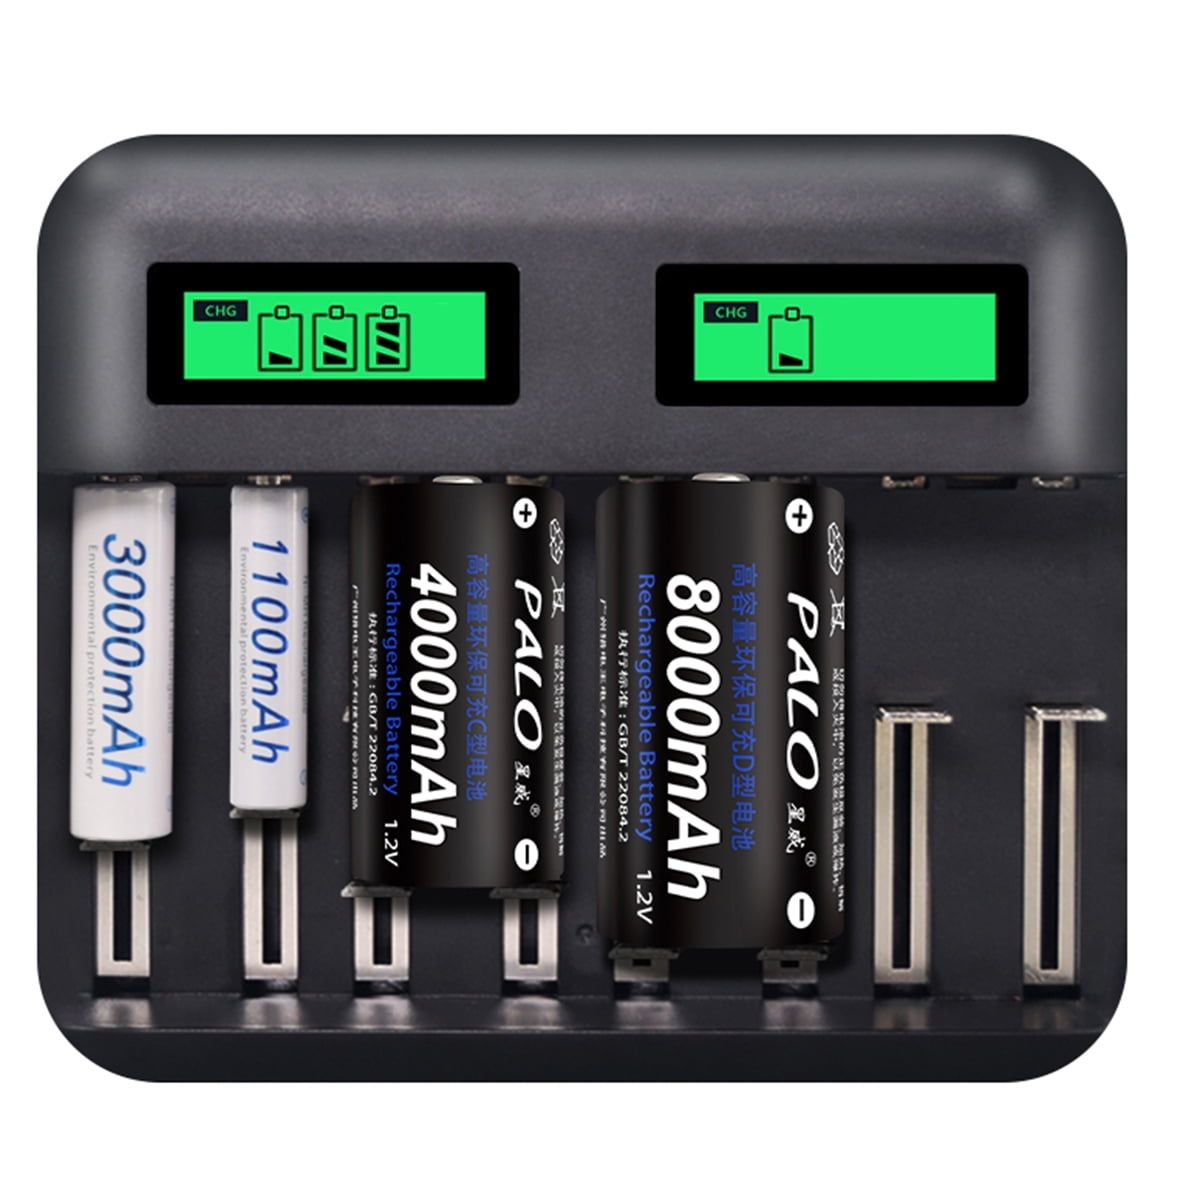 Usb Battery Charger 8 Slots Lcd Display For Aa Aaa C D Size